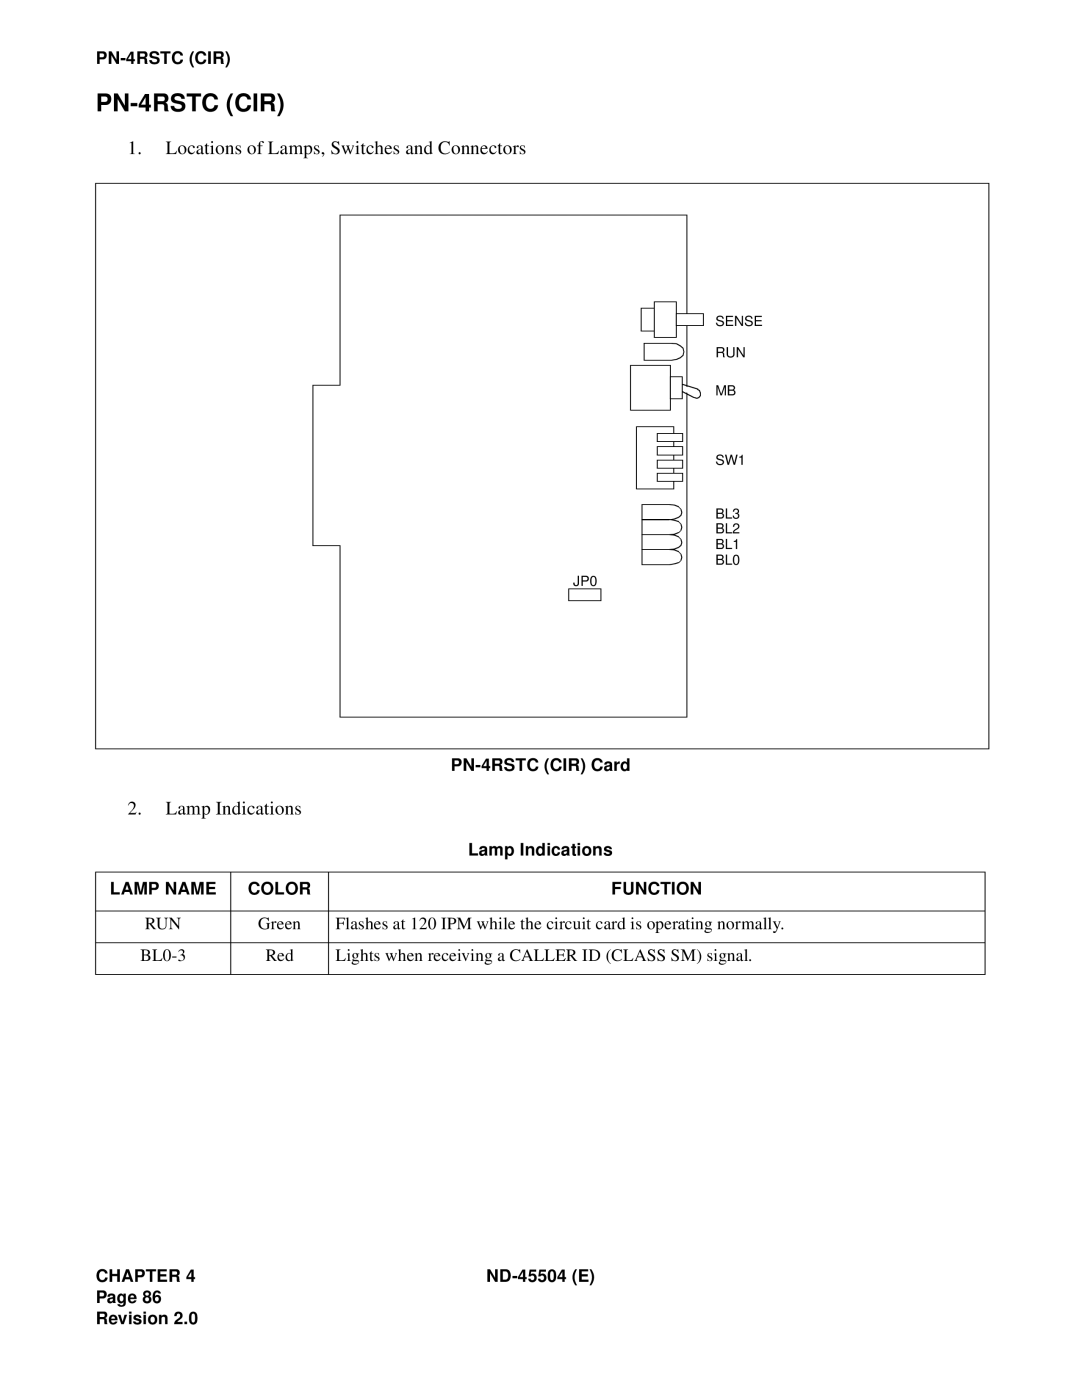 NEC 2000 IVS manual Locations of Lamps, Switches and Connectors, Lamp Indications, PN-4RSTCCIR Card, Lamp Name, Color 